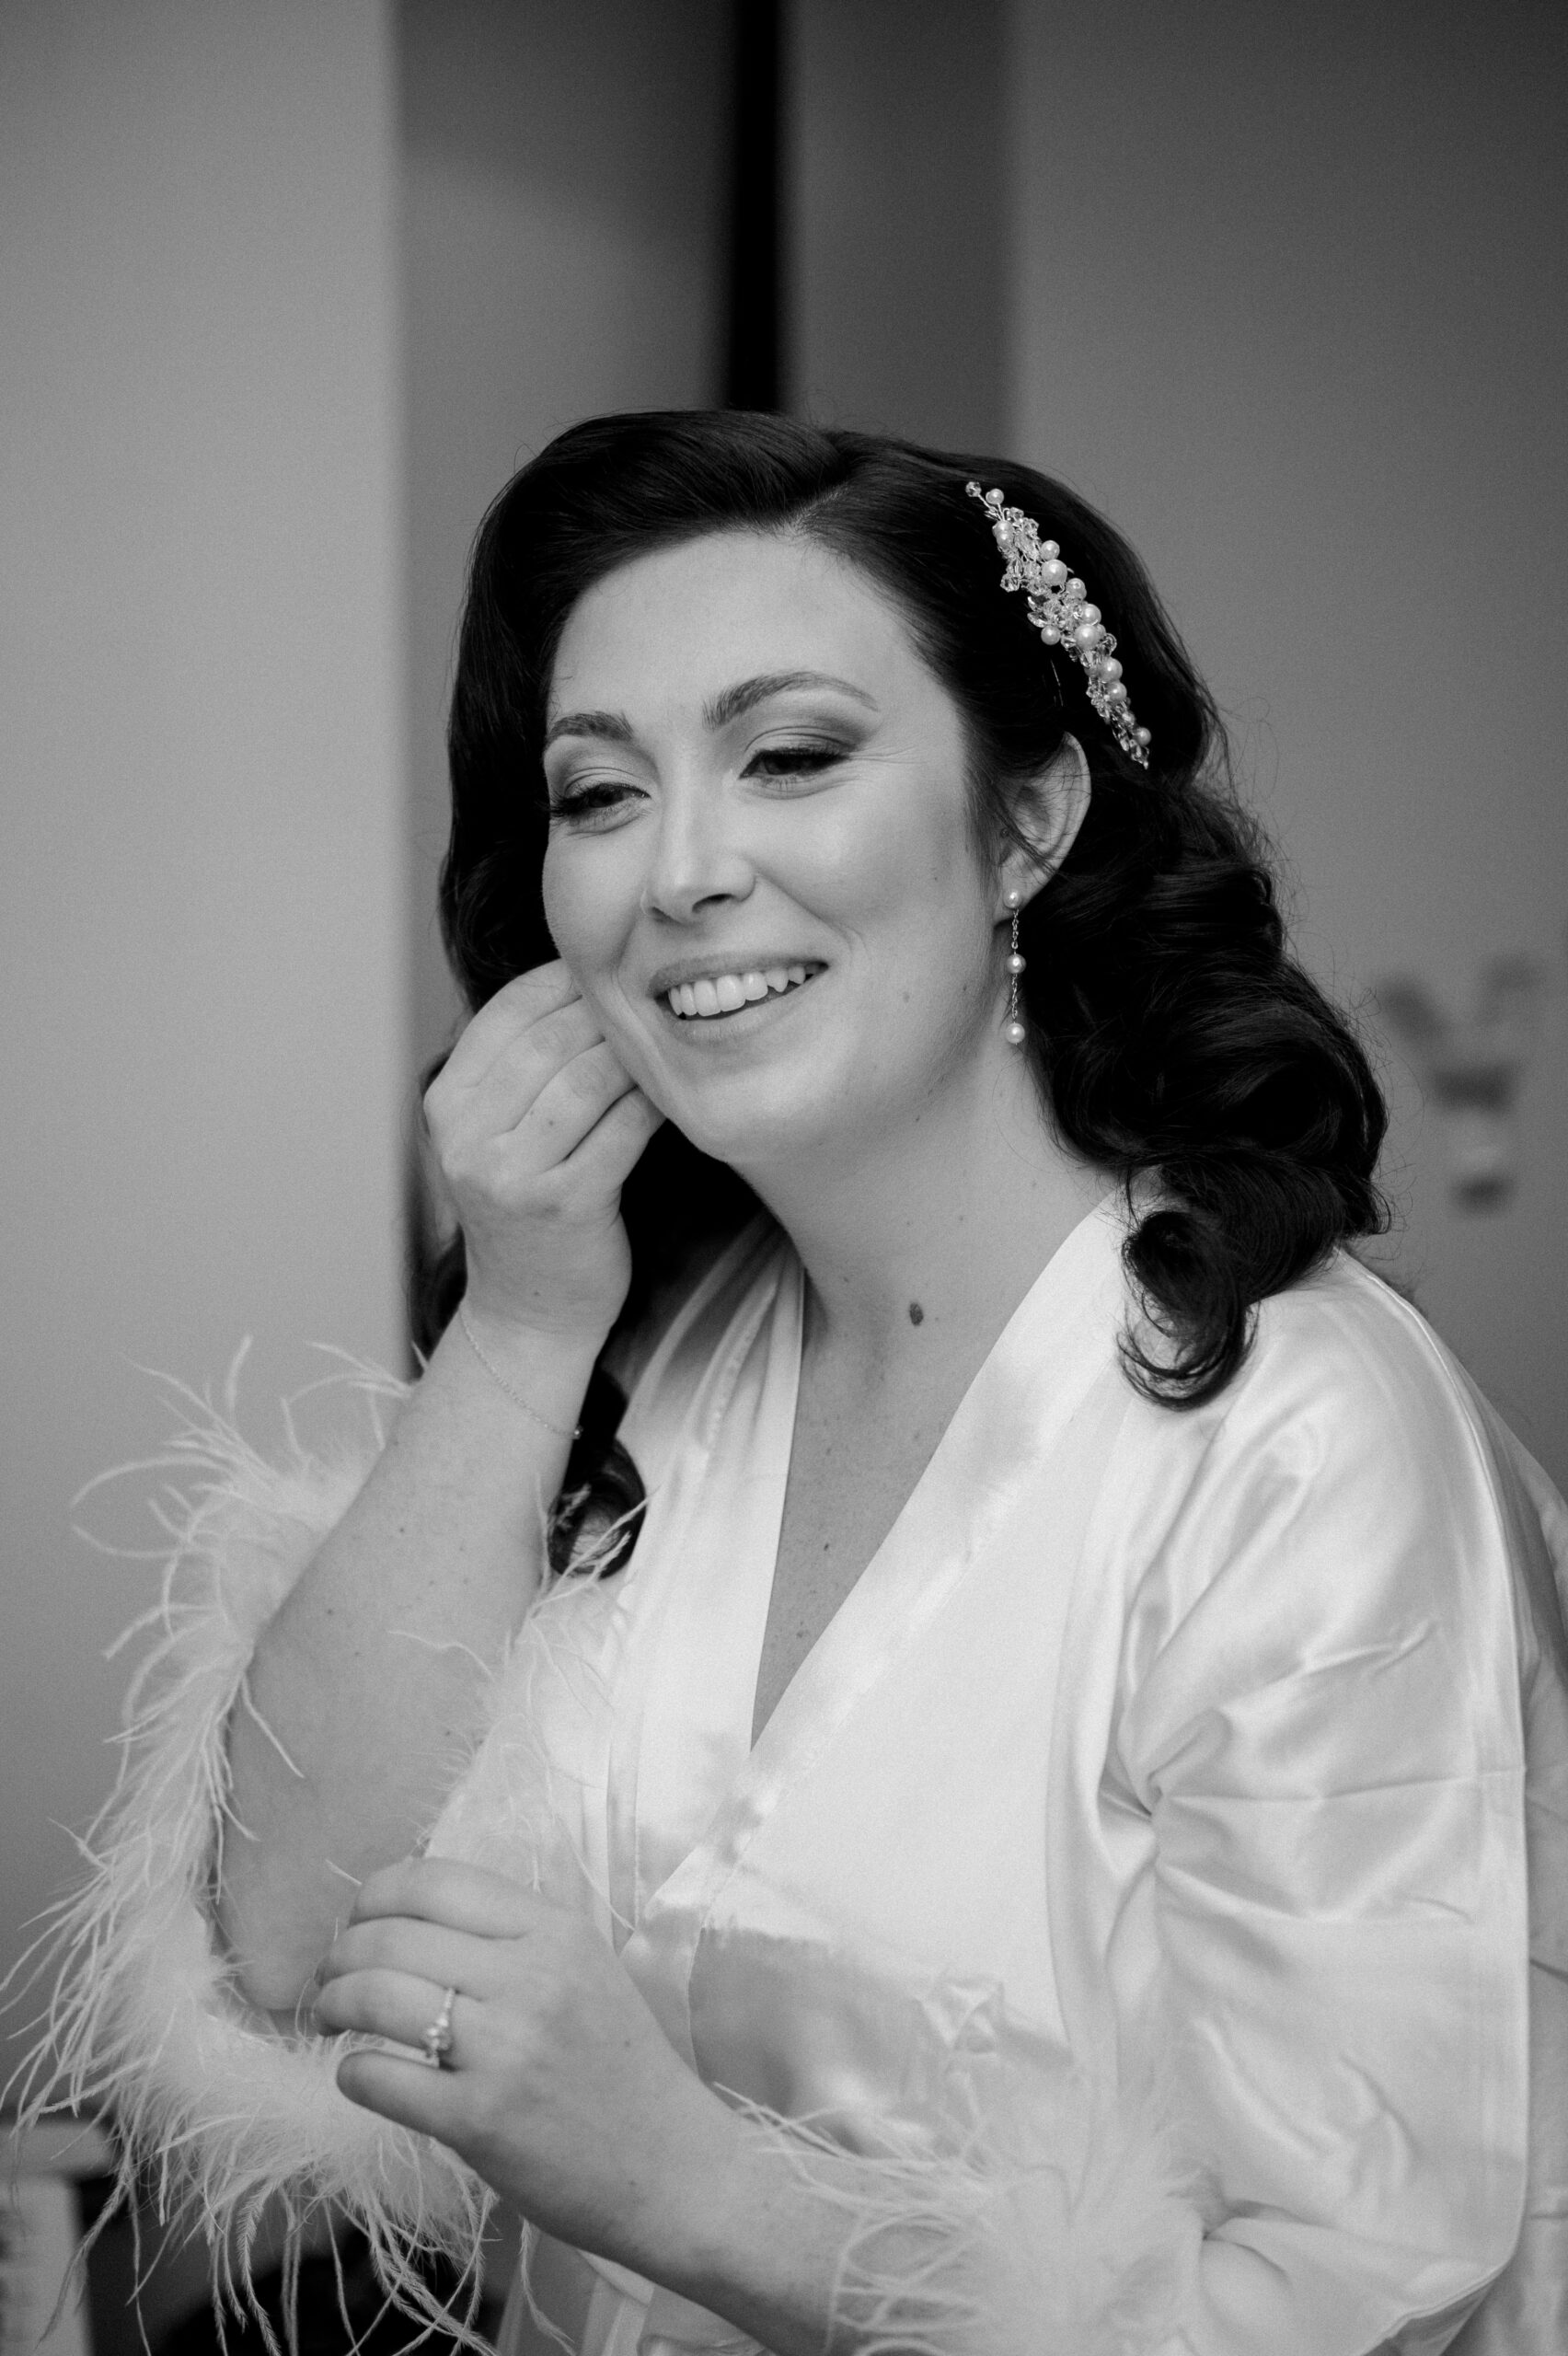 black and white photo of bride with her hair and makeup done, putting in one of her earrings while wearing a white robe with feathered details at end of sleeves